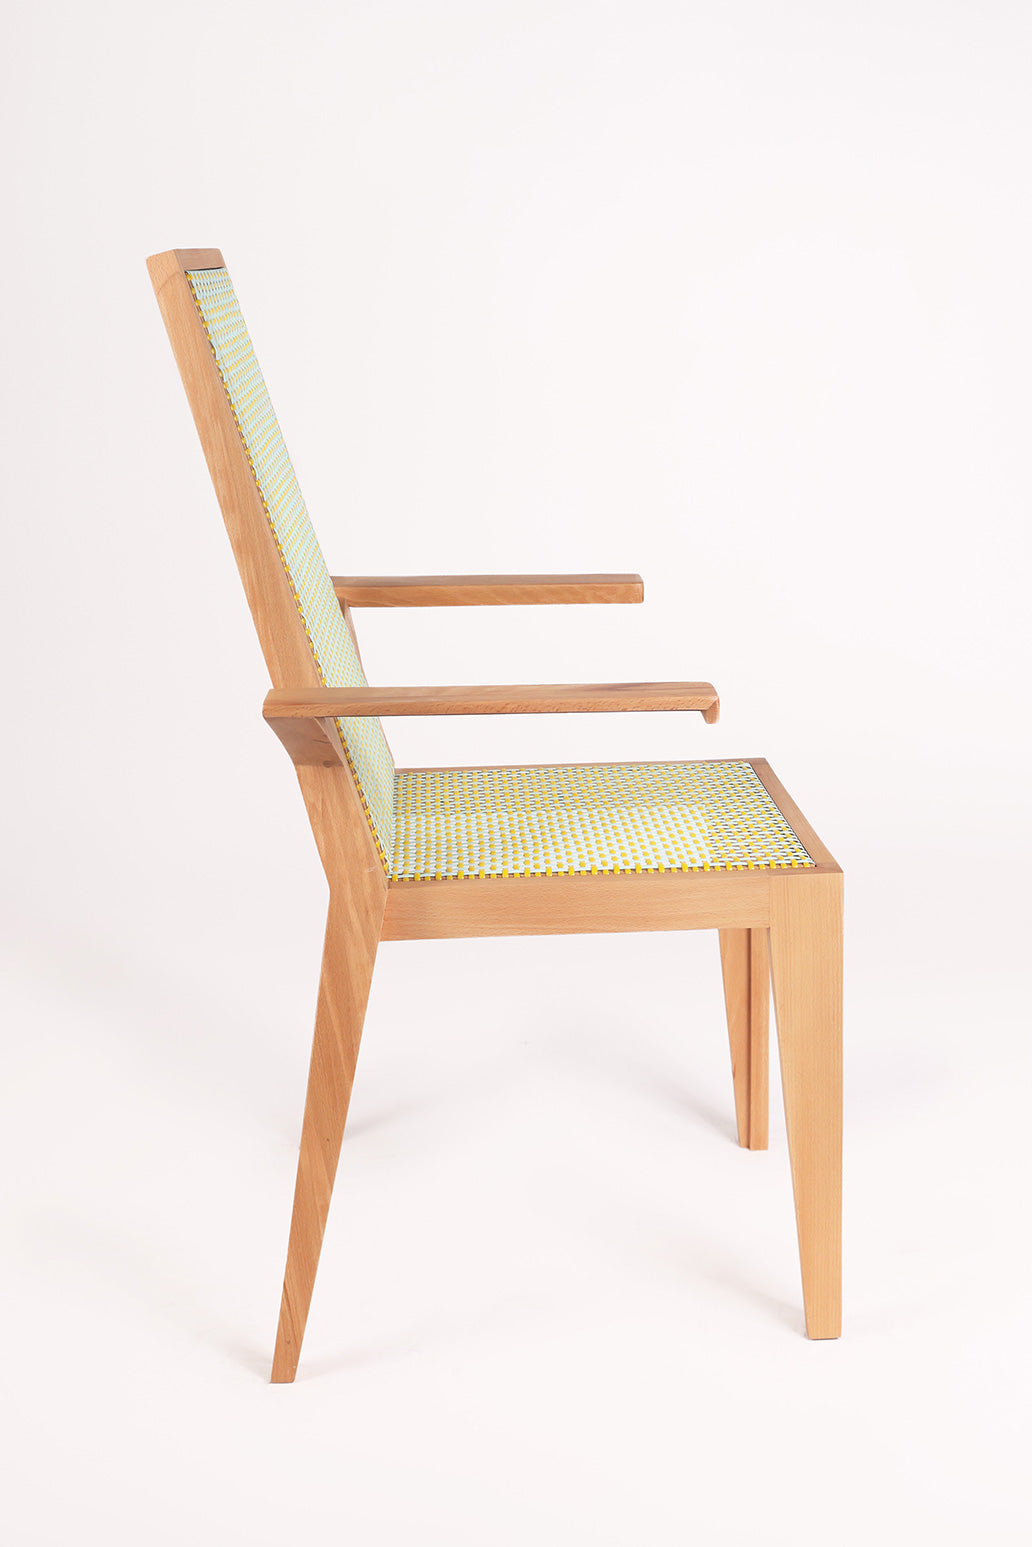 Nour chair by Adam Nathaniel Furman for Beit Collective, made in Beirut